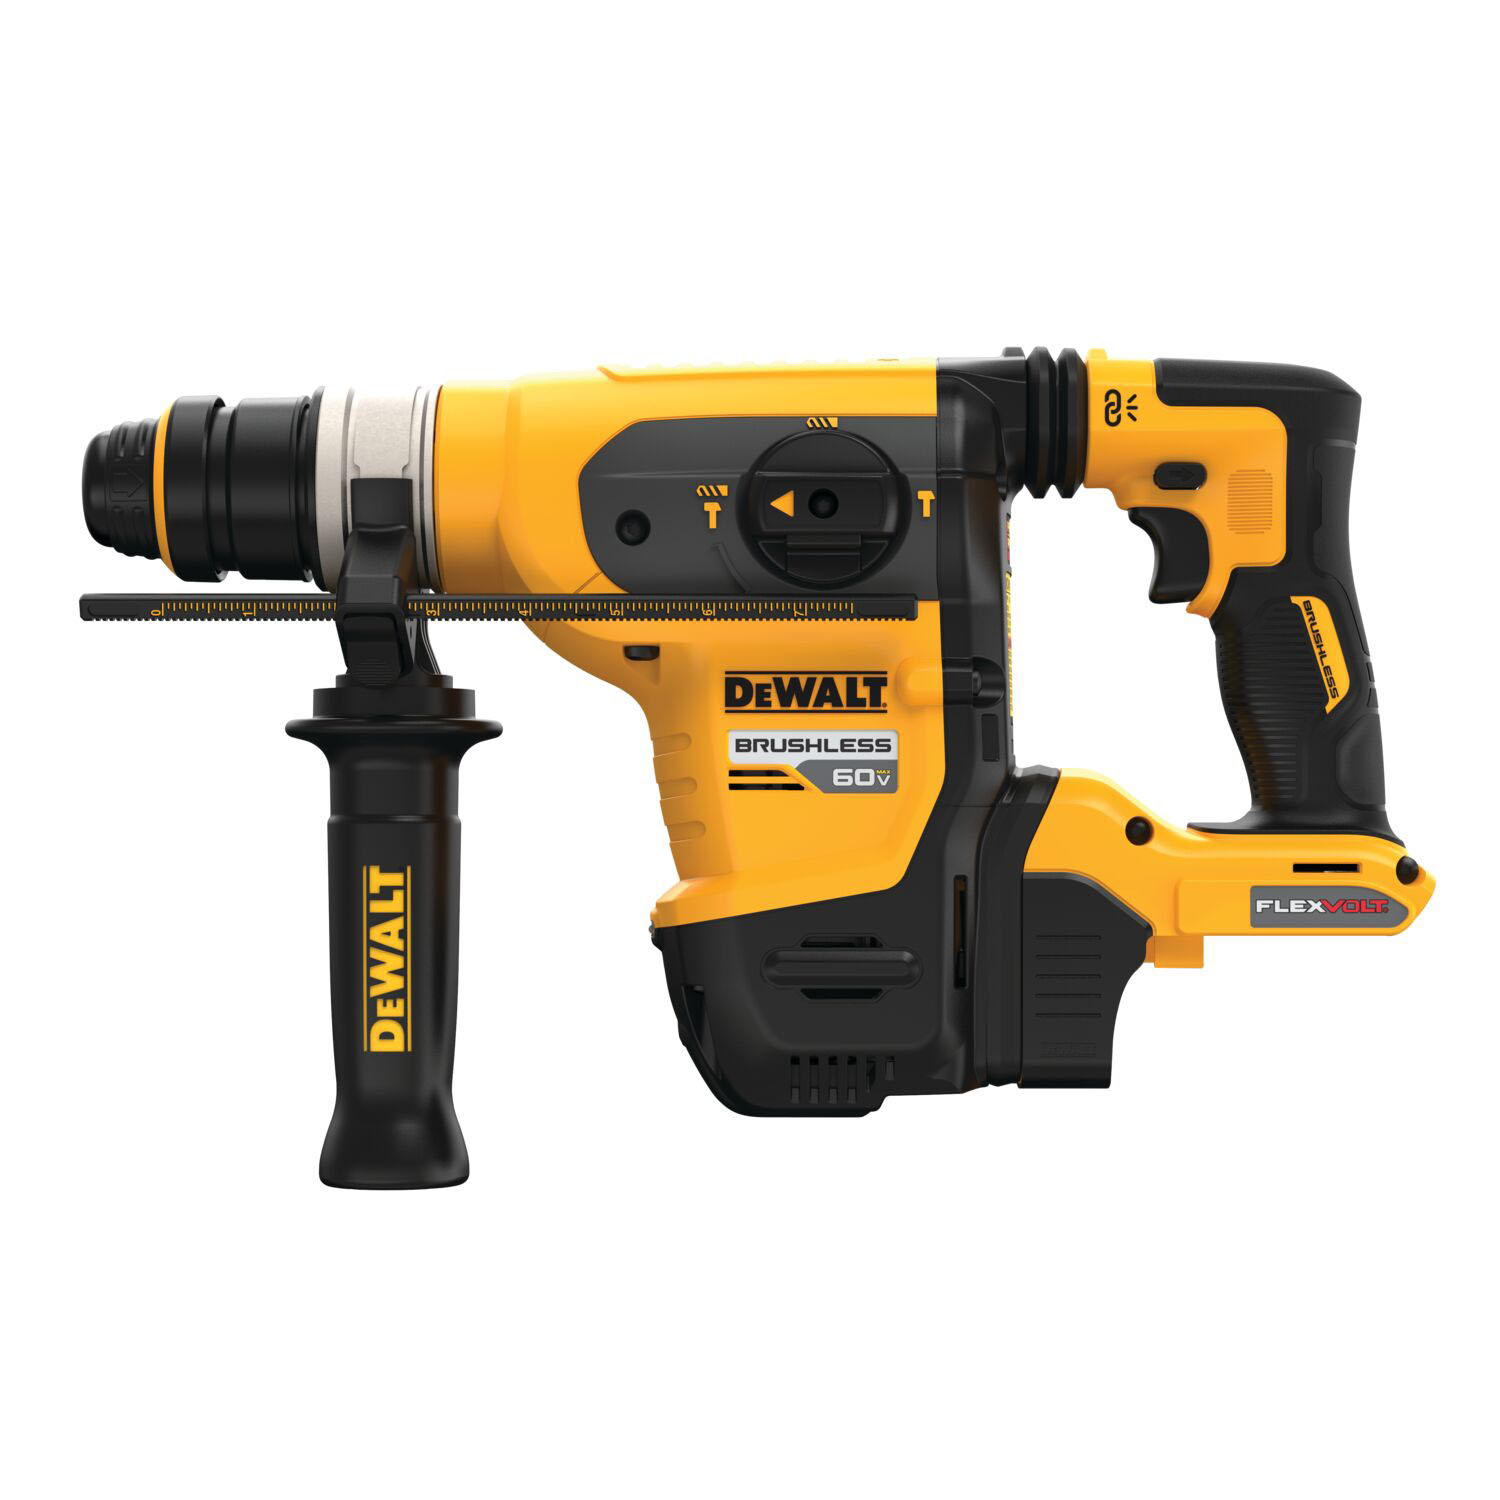 60V MAX 1-1/4 IN. BRUSHLESS CORDLESS SDS PLUS ROTARY HAMMER (TOOL ONLY)